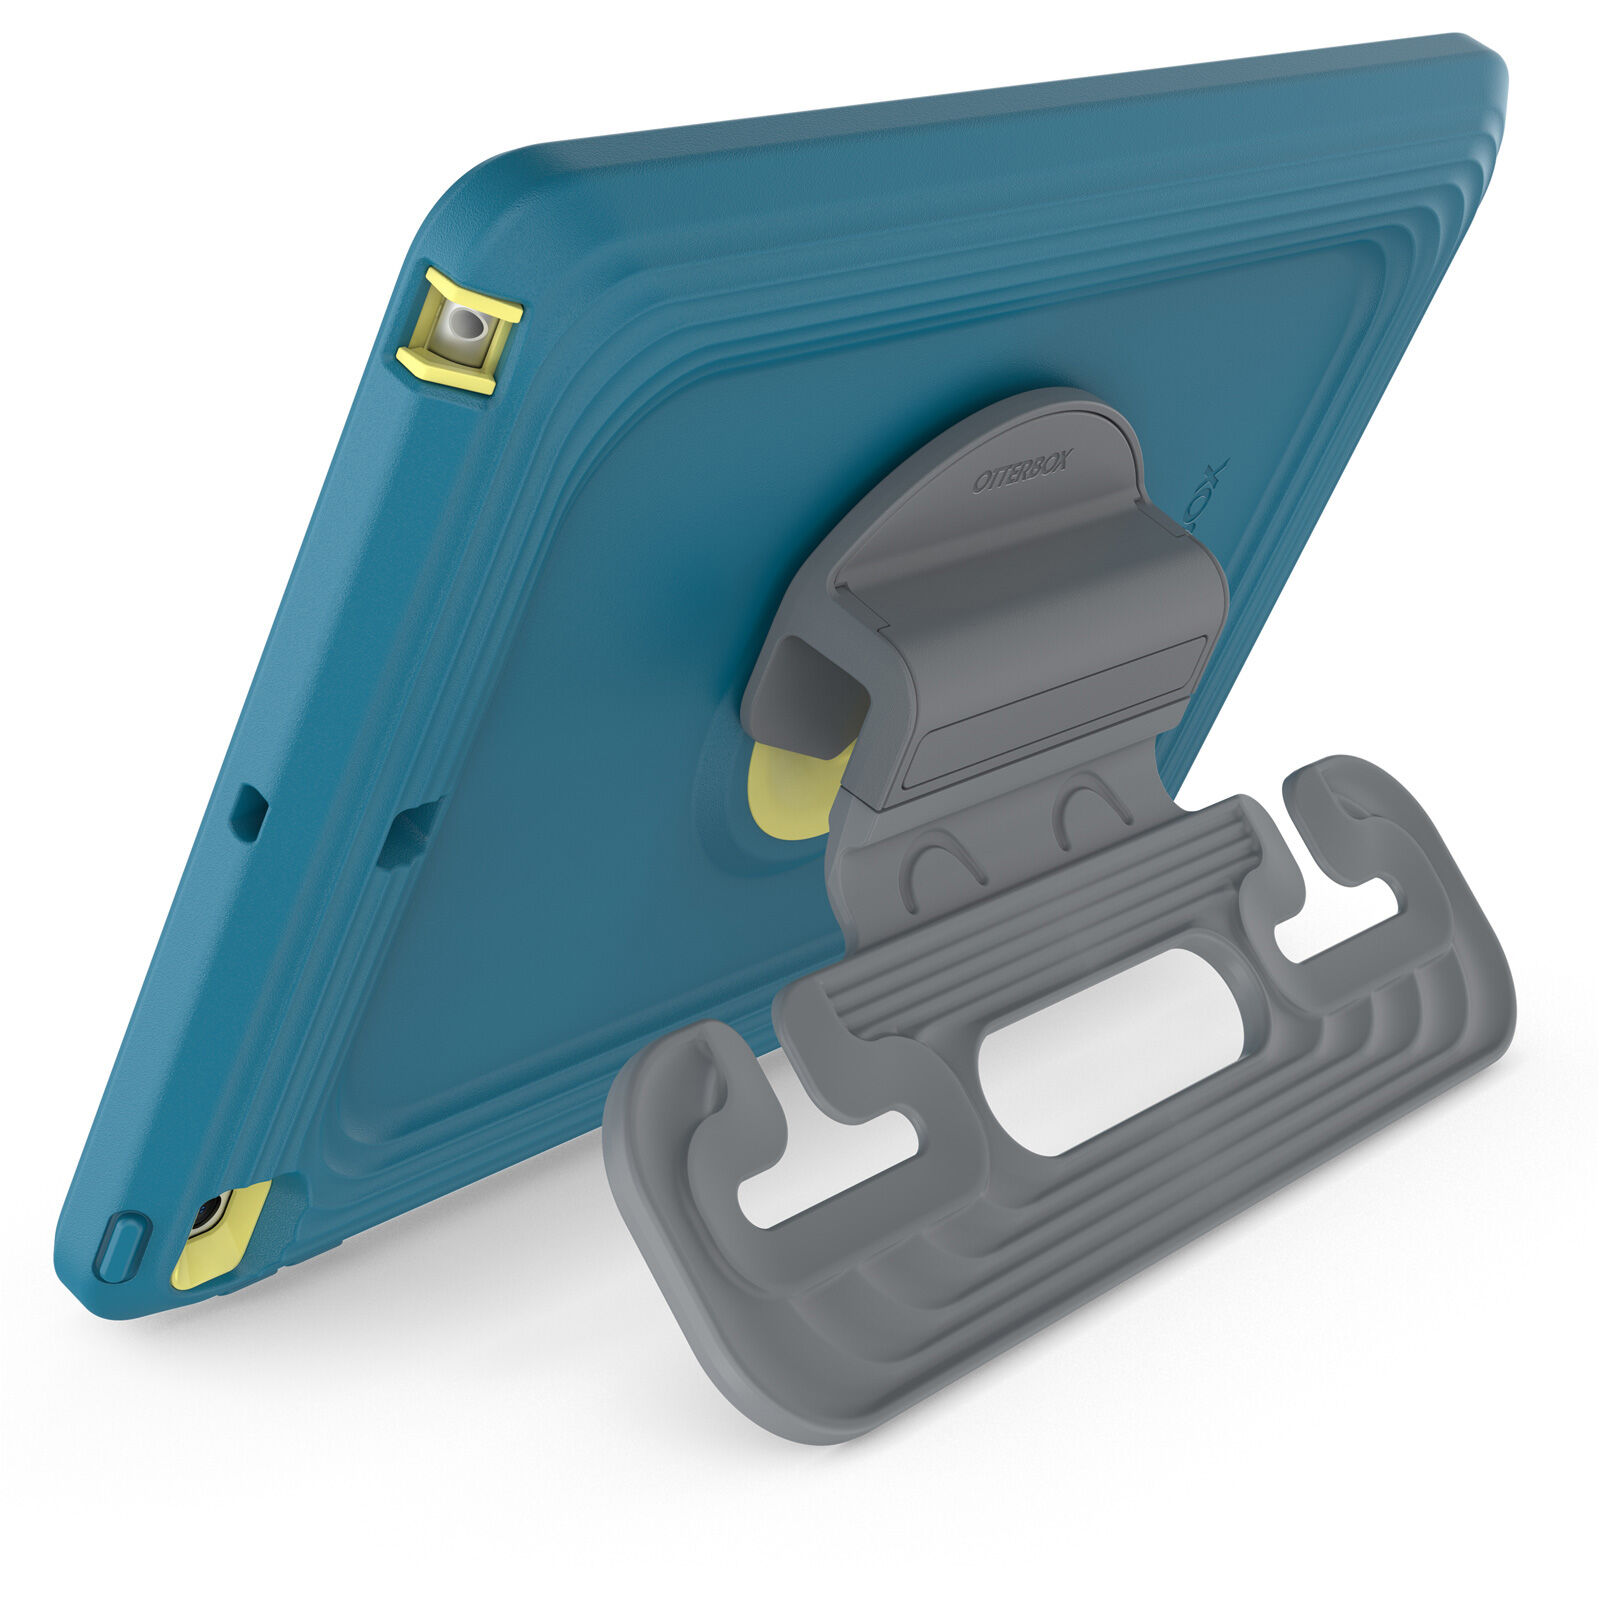 iPad (7th gen) cases from OtterBox